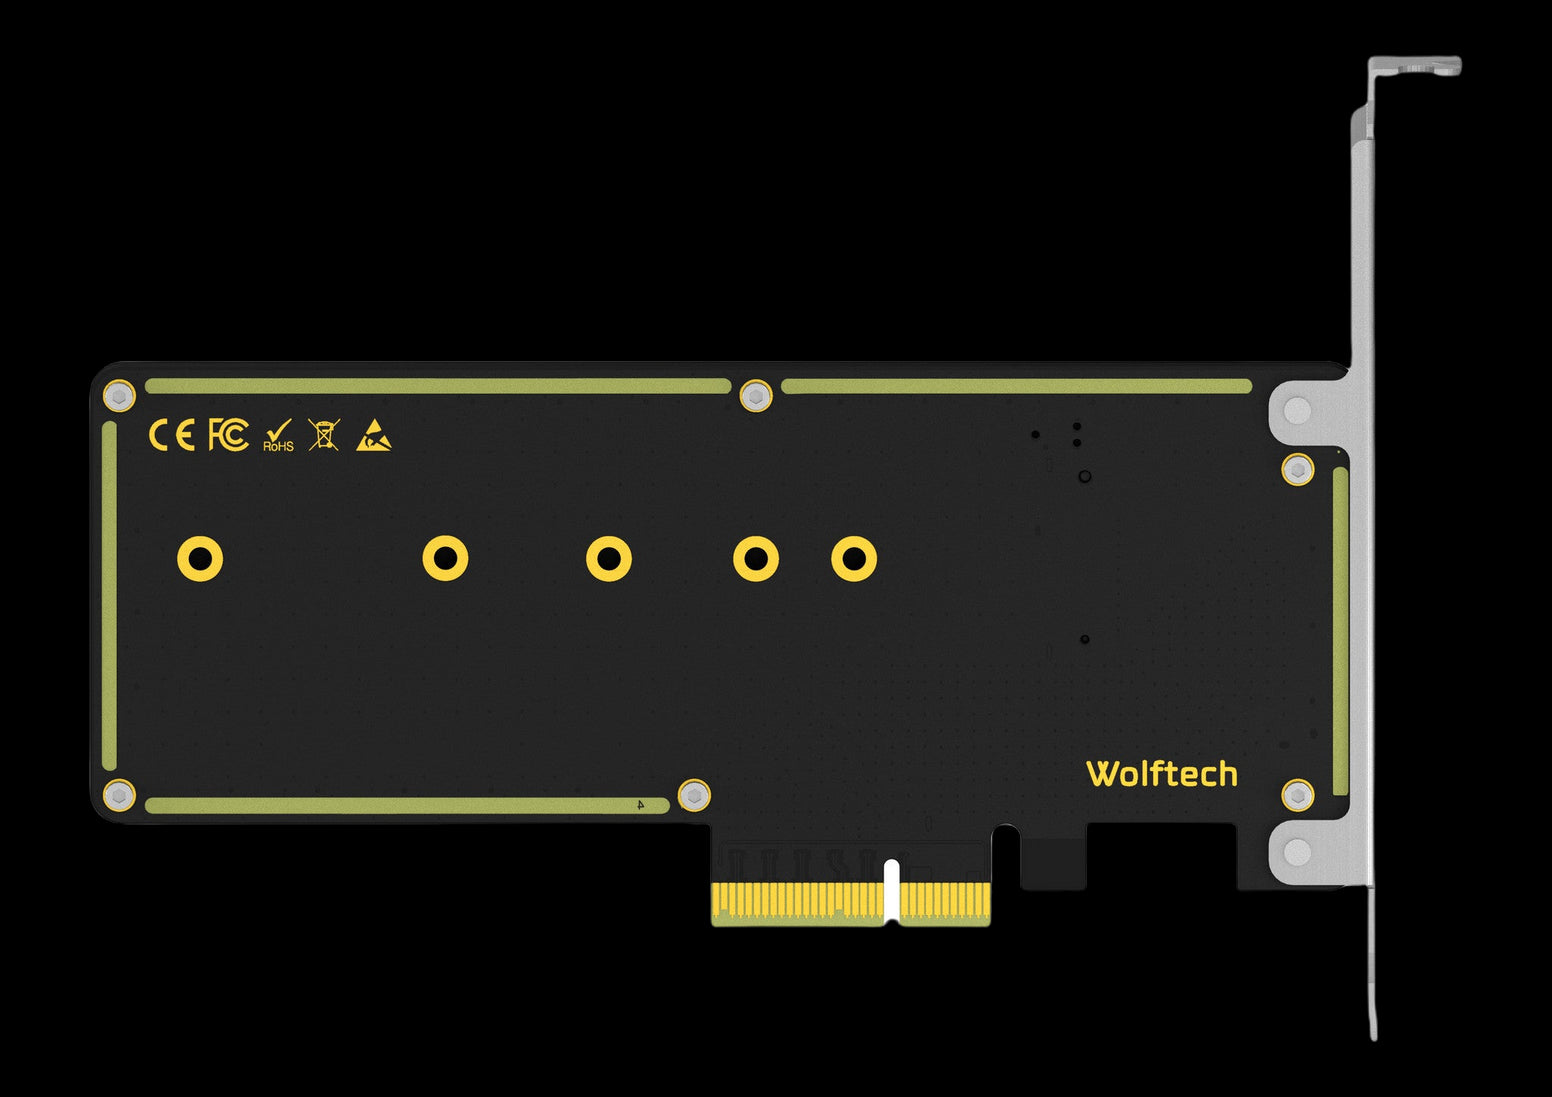 Wolftech pulsecard - PCIe 3.0 x4 Adapter for PCIe M.2 SSDs - Same as Angelbird PX1 but without LEDs.  Produced by Angelbird for Wolftech